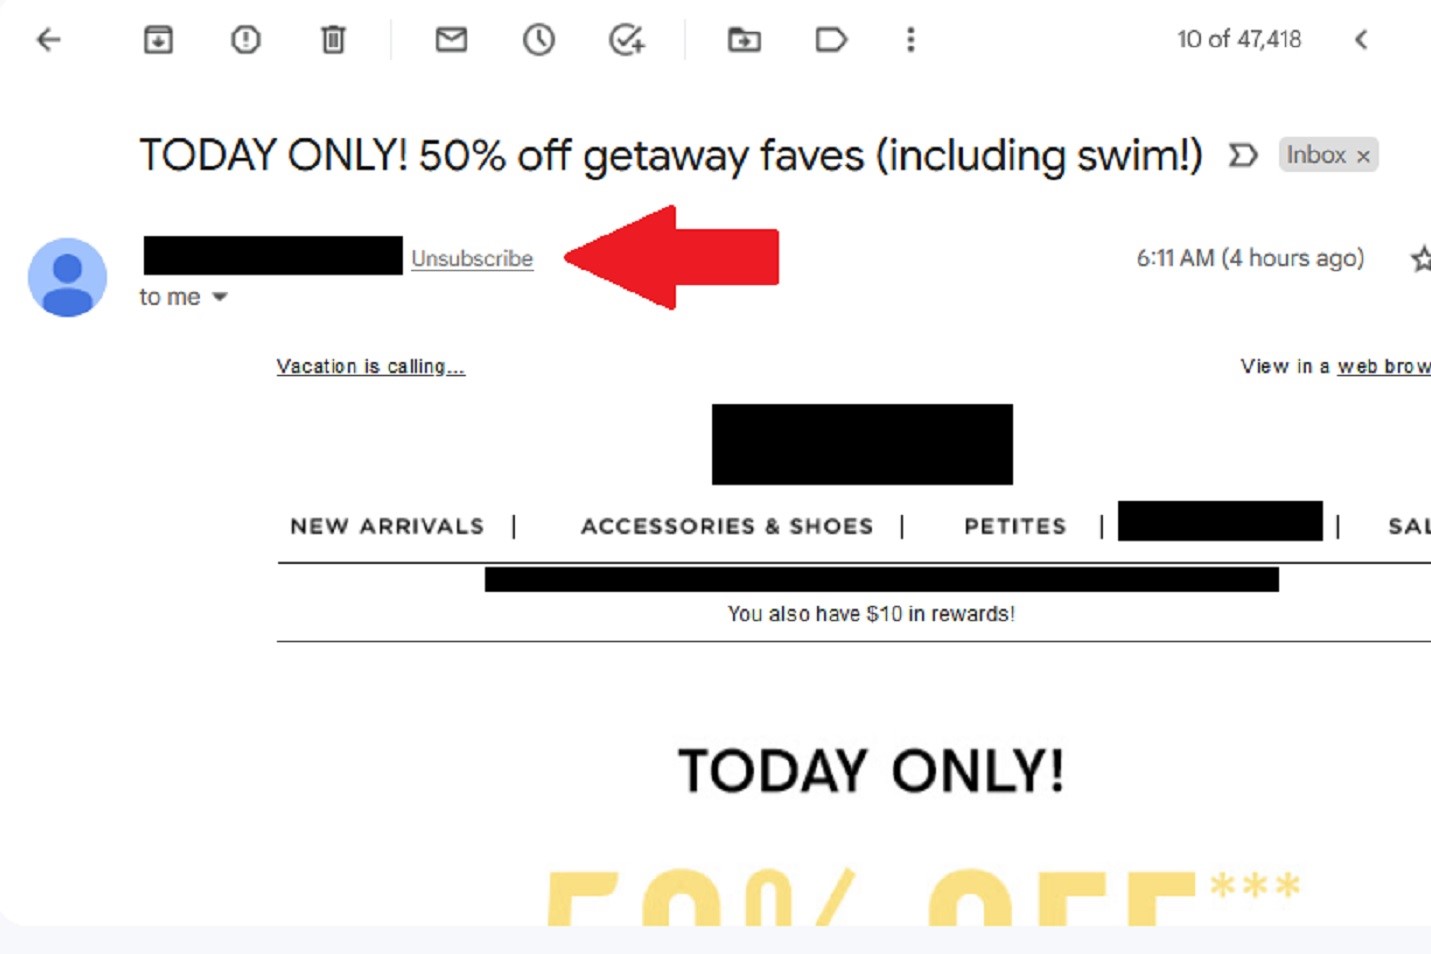 Gmail unsubscribe button in a promotional email.